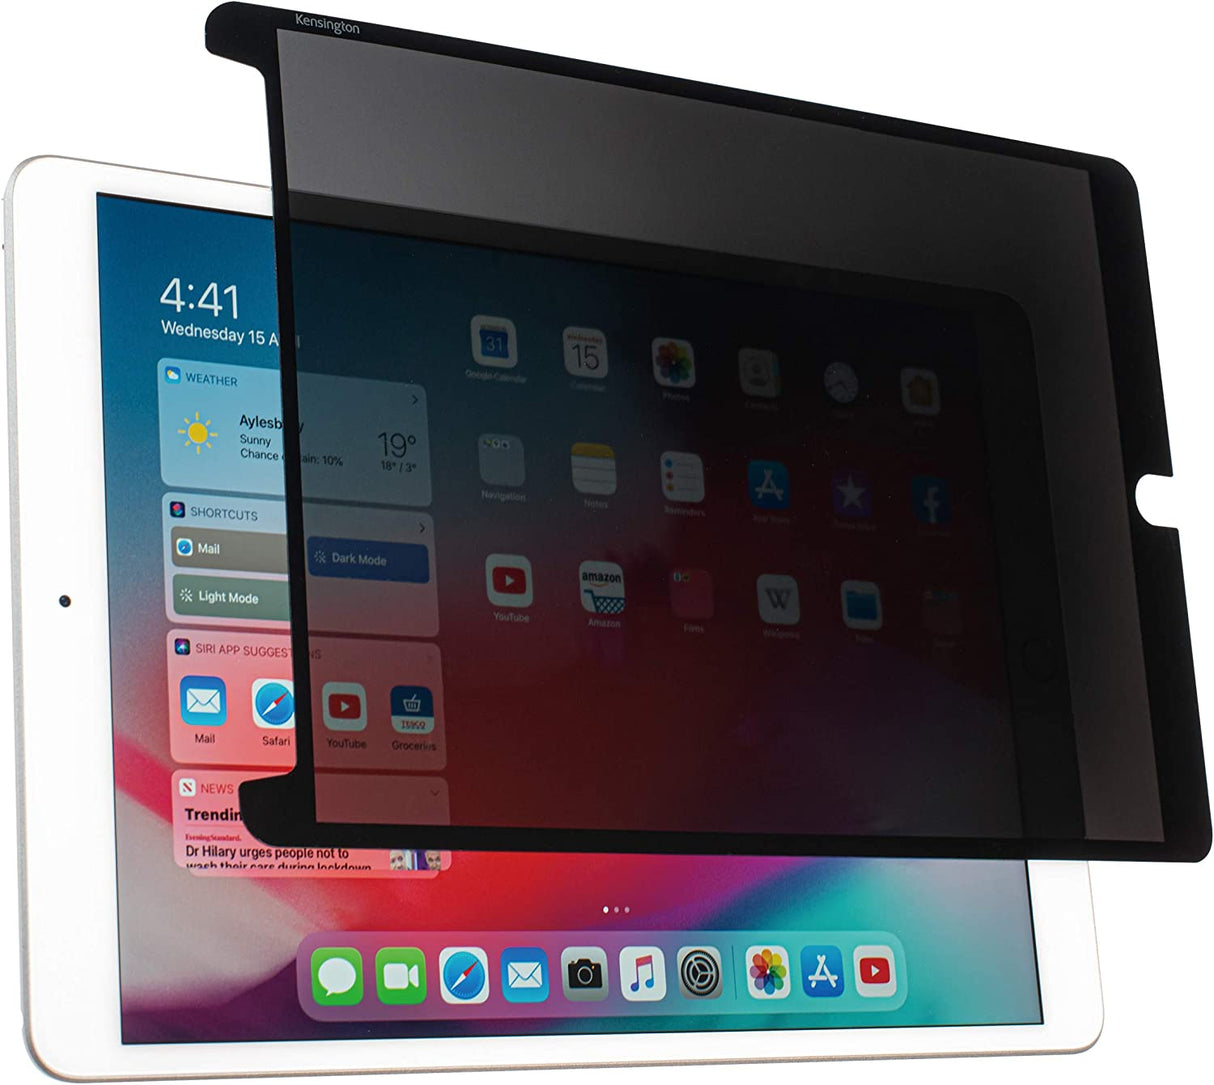 Kensington SA102 Screen Protector Designed for iPad 10.2-inch 2019/2020 (8th &amp; 7th Generation), Easy Installation with a Washable &amp; Resuable Adhesive (K50726WW), Black border iPad 10.2-inch 8th &amp; 7th Generation (2020/2019)